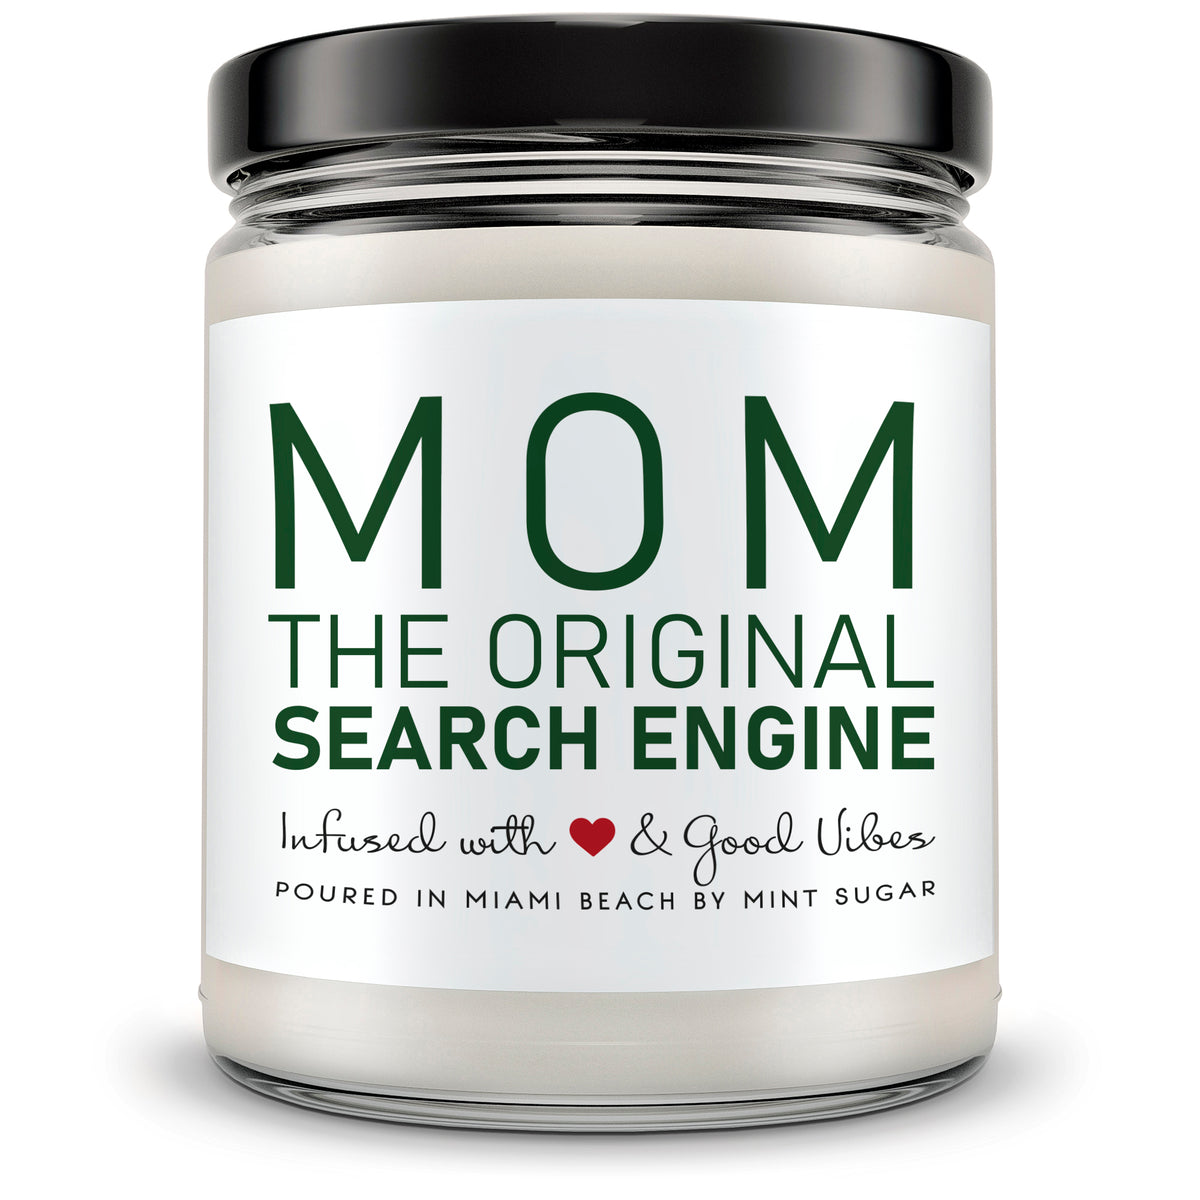 Mom the Original Search Engine - Mint Sugar Candle